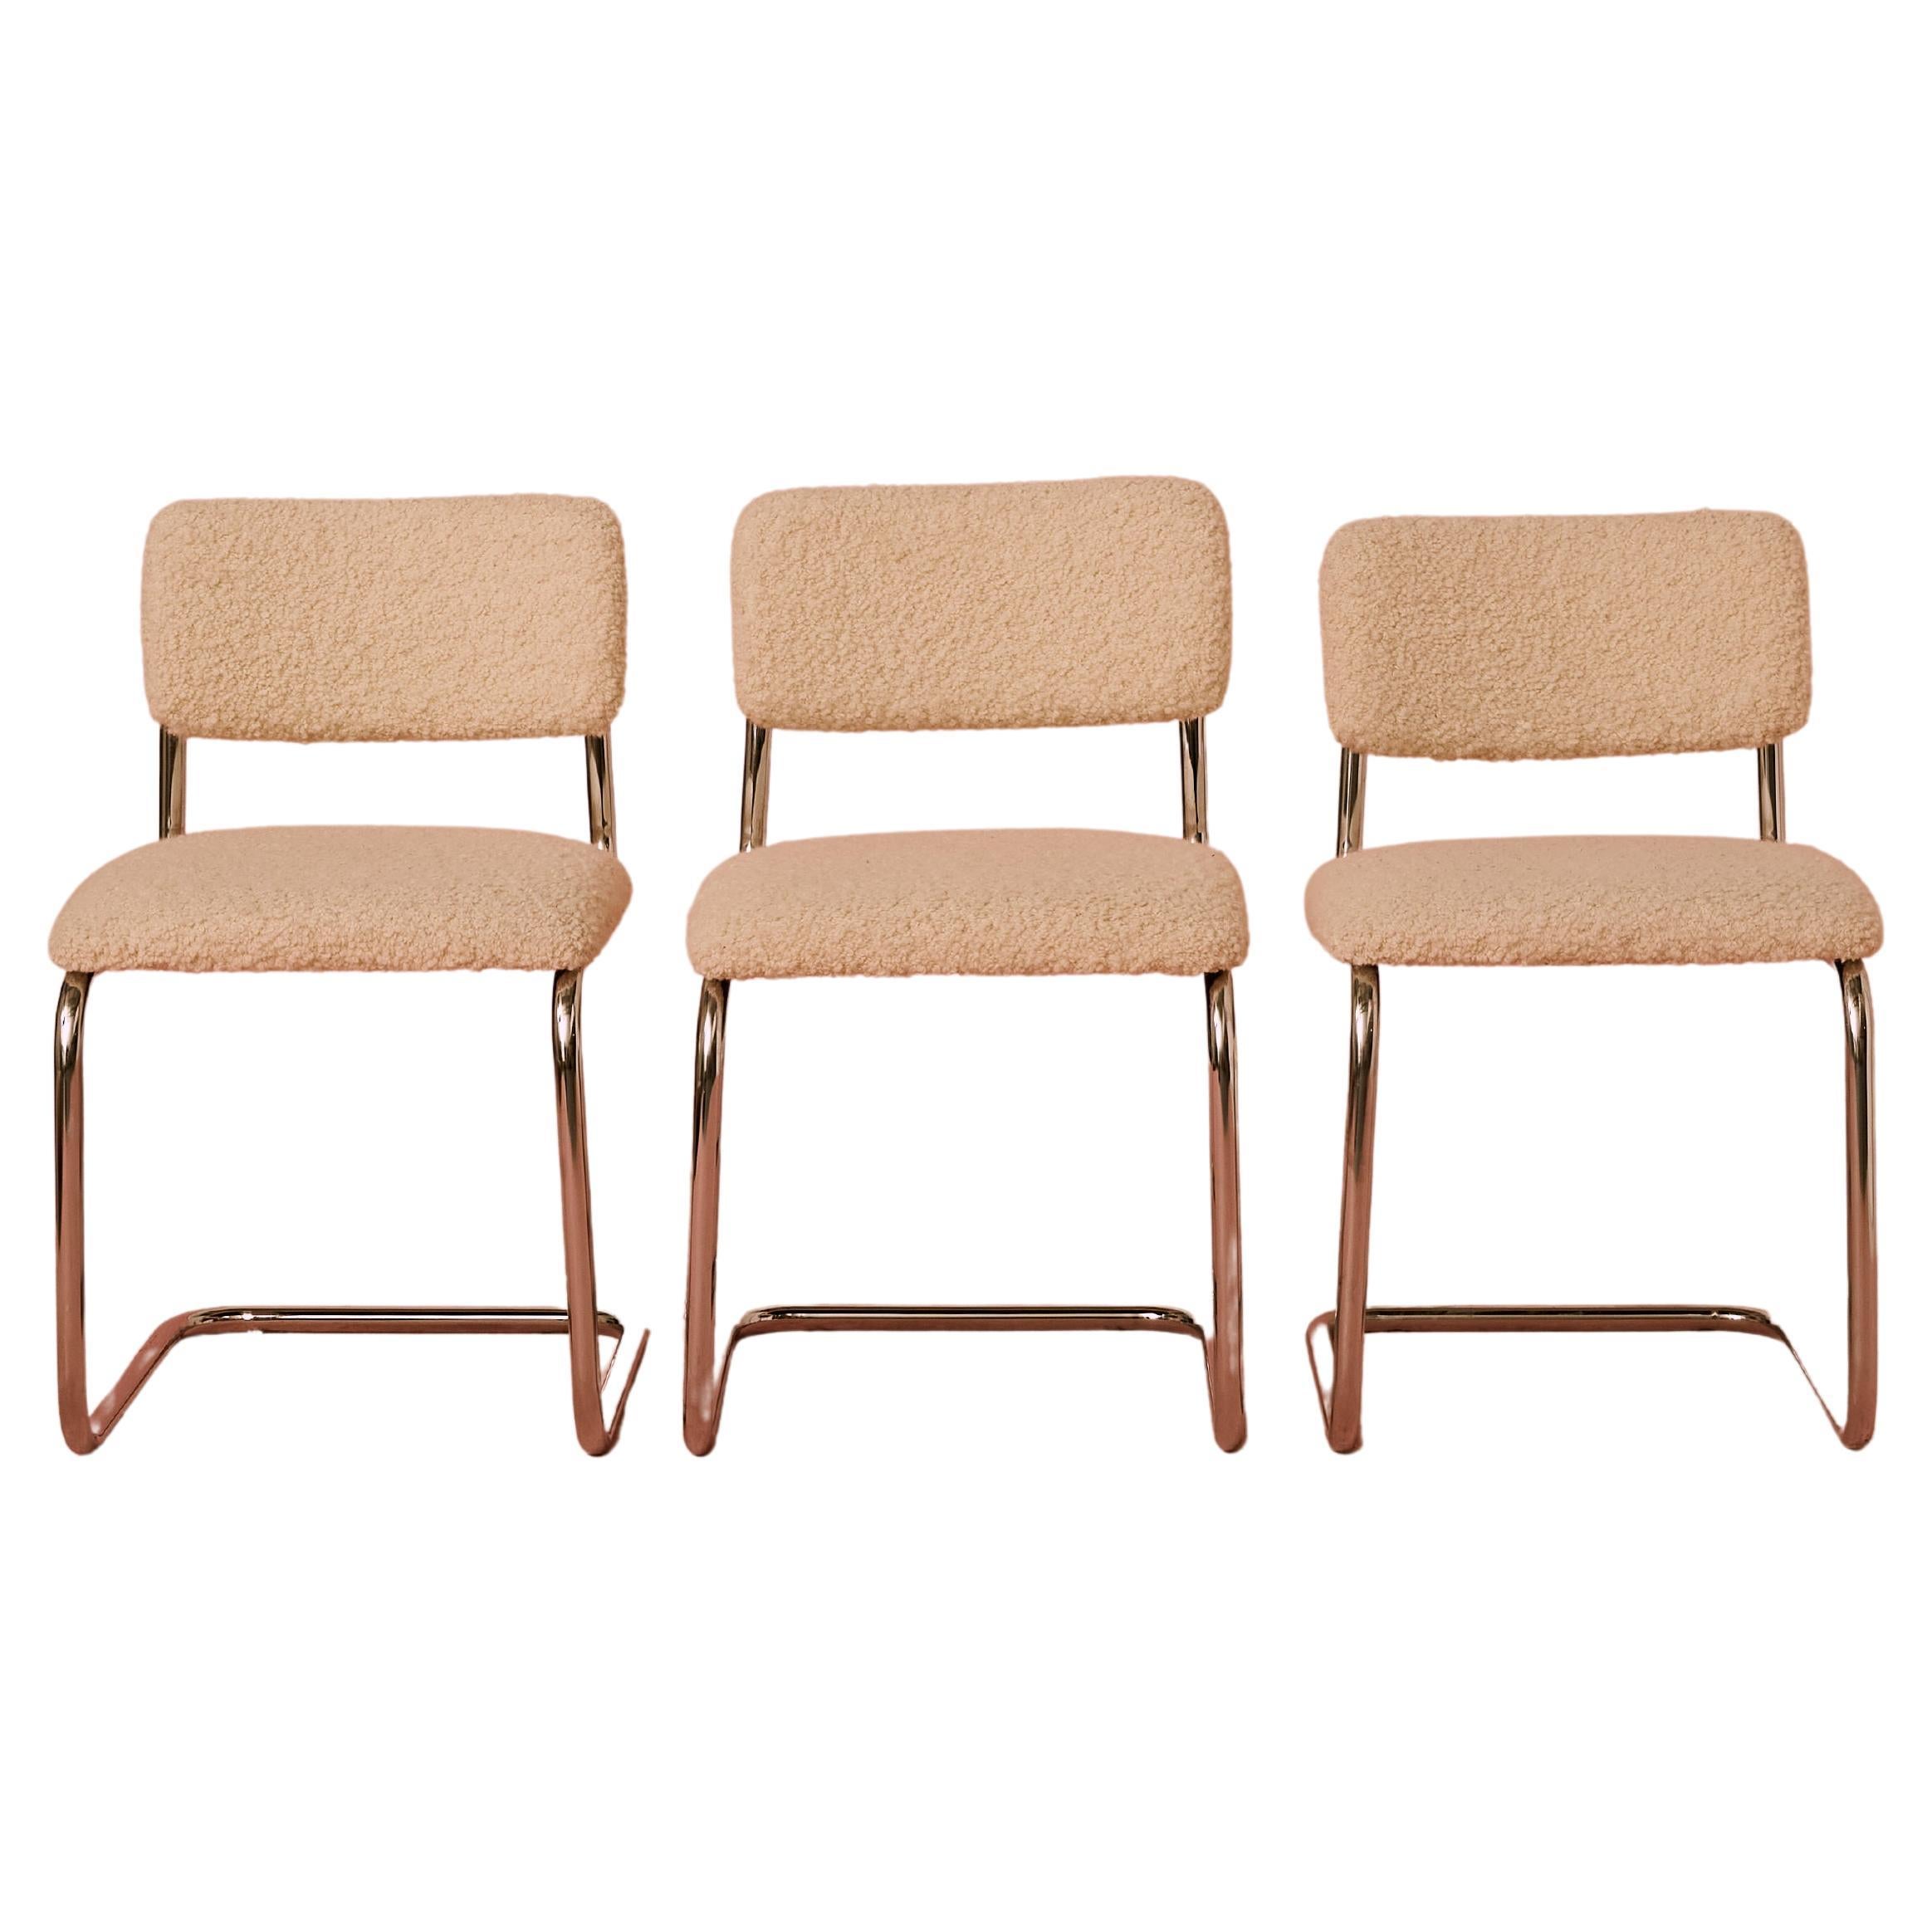 Cesca chairs, named after Marcel Breuer’s daughter, Francesca, are celebrated for their iconic modernist design. Featuring a sleek tubular steel frame and offering a choice between a cane seat and back or upholstered in a Dedar Ivy White fabric,